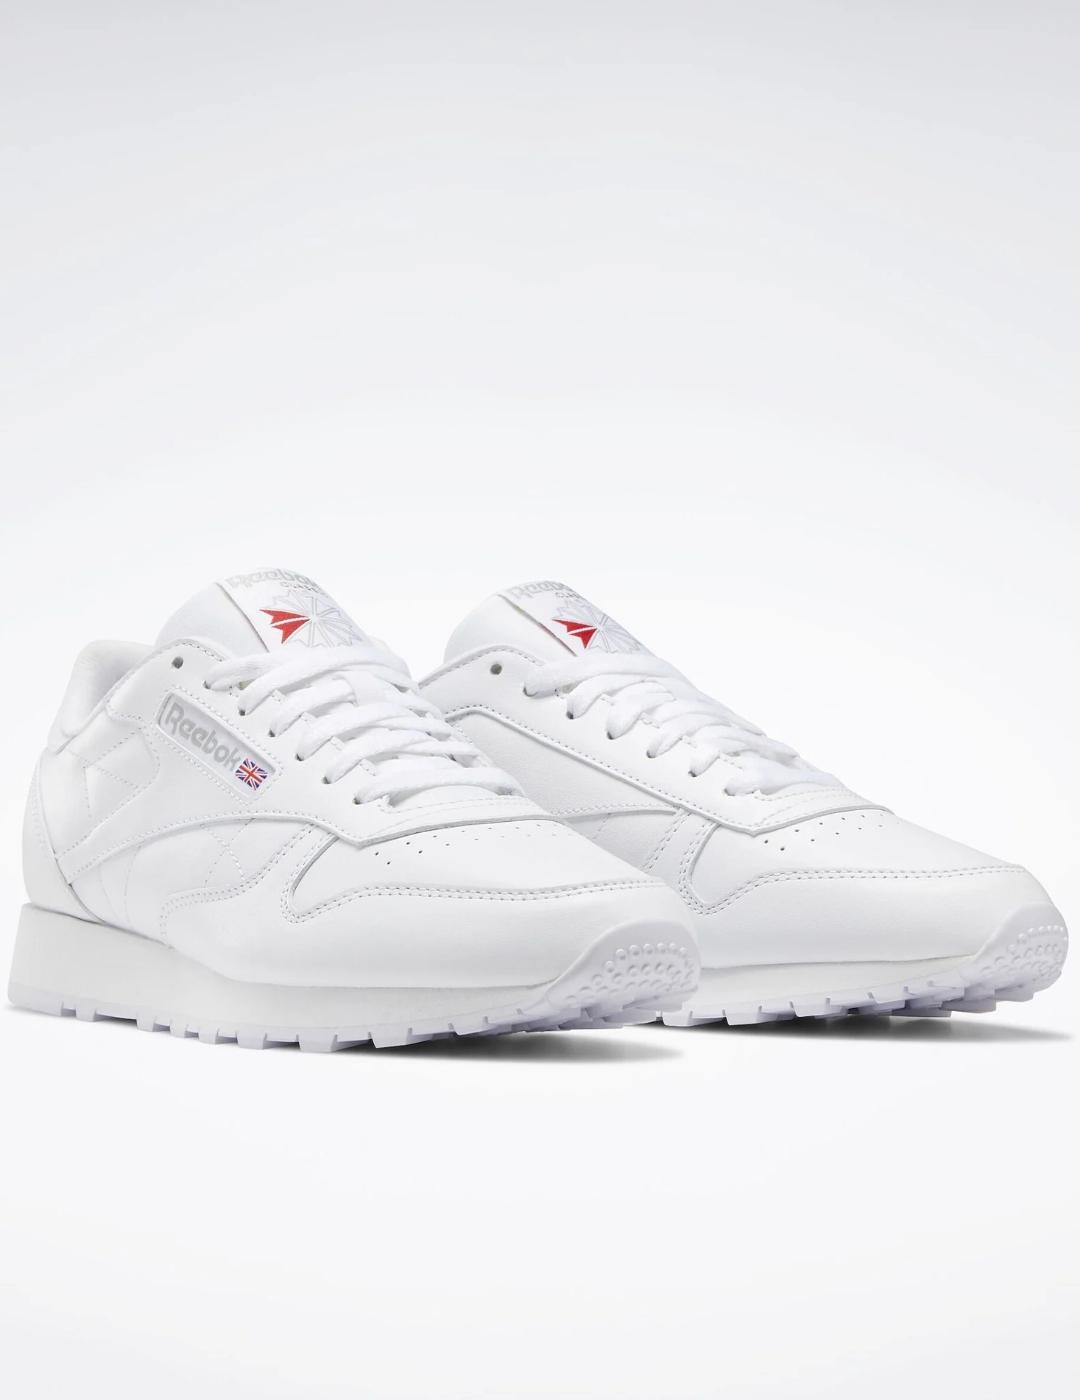 Classic Leather Shoes - Ftwr White / Pure Grey 3 / Reebok Rubber Gum-03